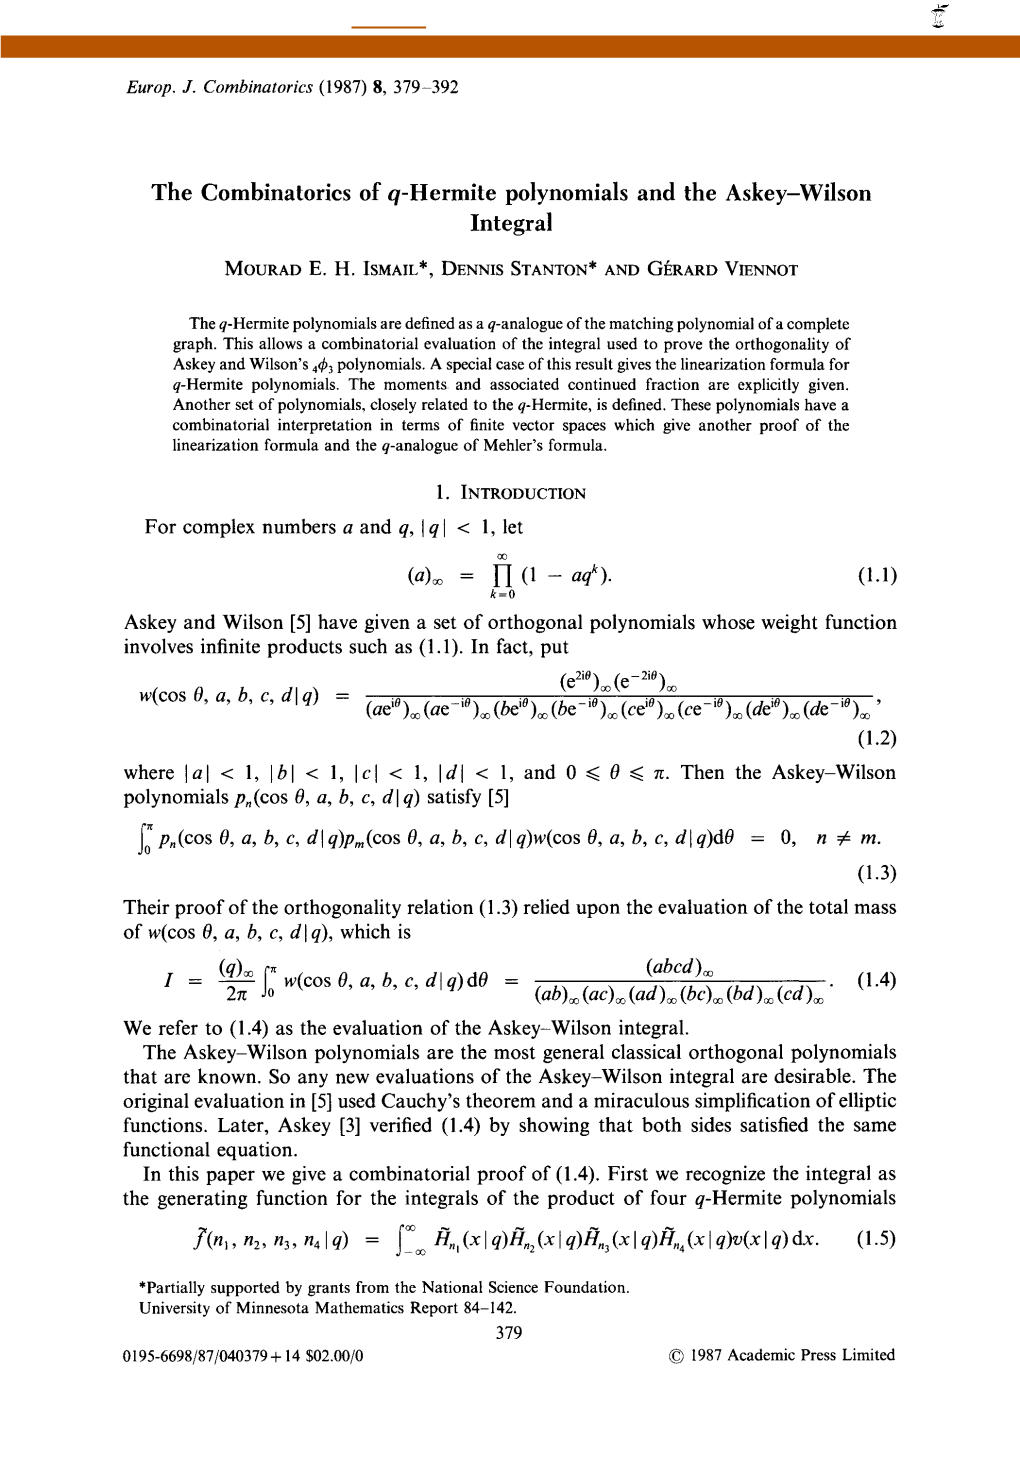 The Combinatorics of Q-Hermite Polynomials and the Askey—Wilson Integral